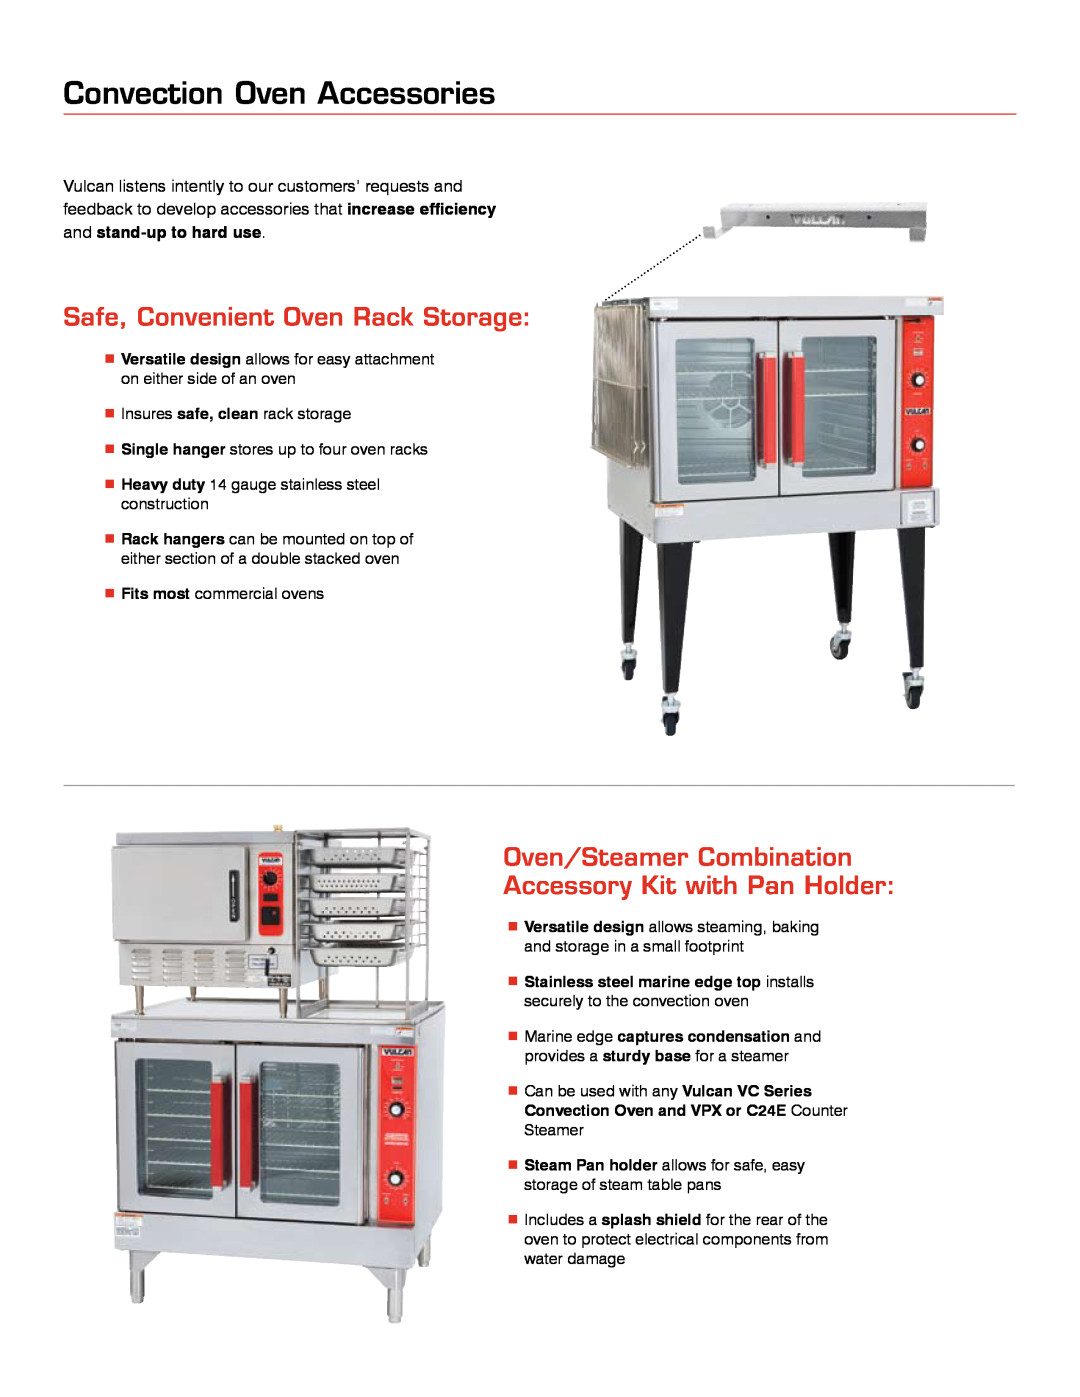 Vulcan-Hart VC6G manual Convection Oven Accessories, Safe, Convenient Oven Rack Storage 